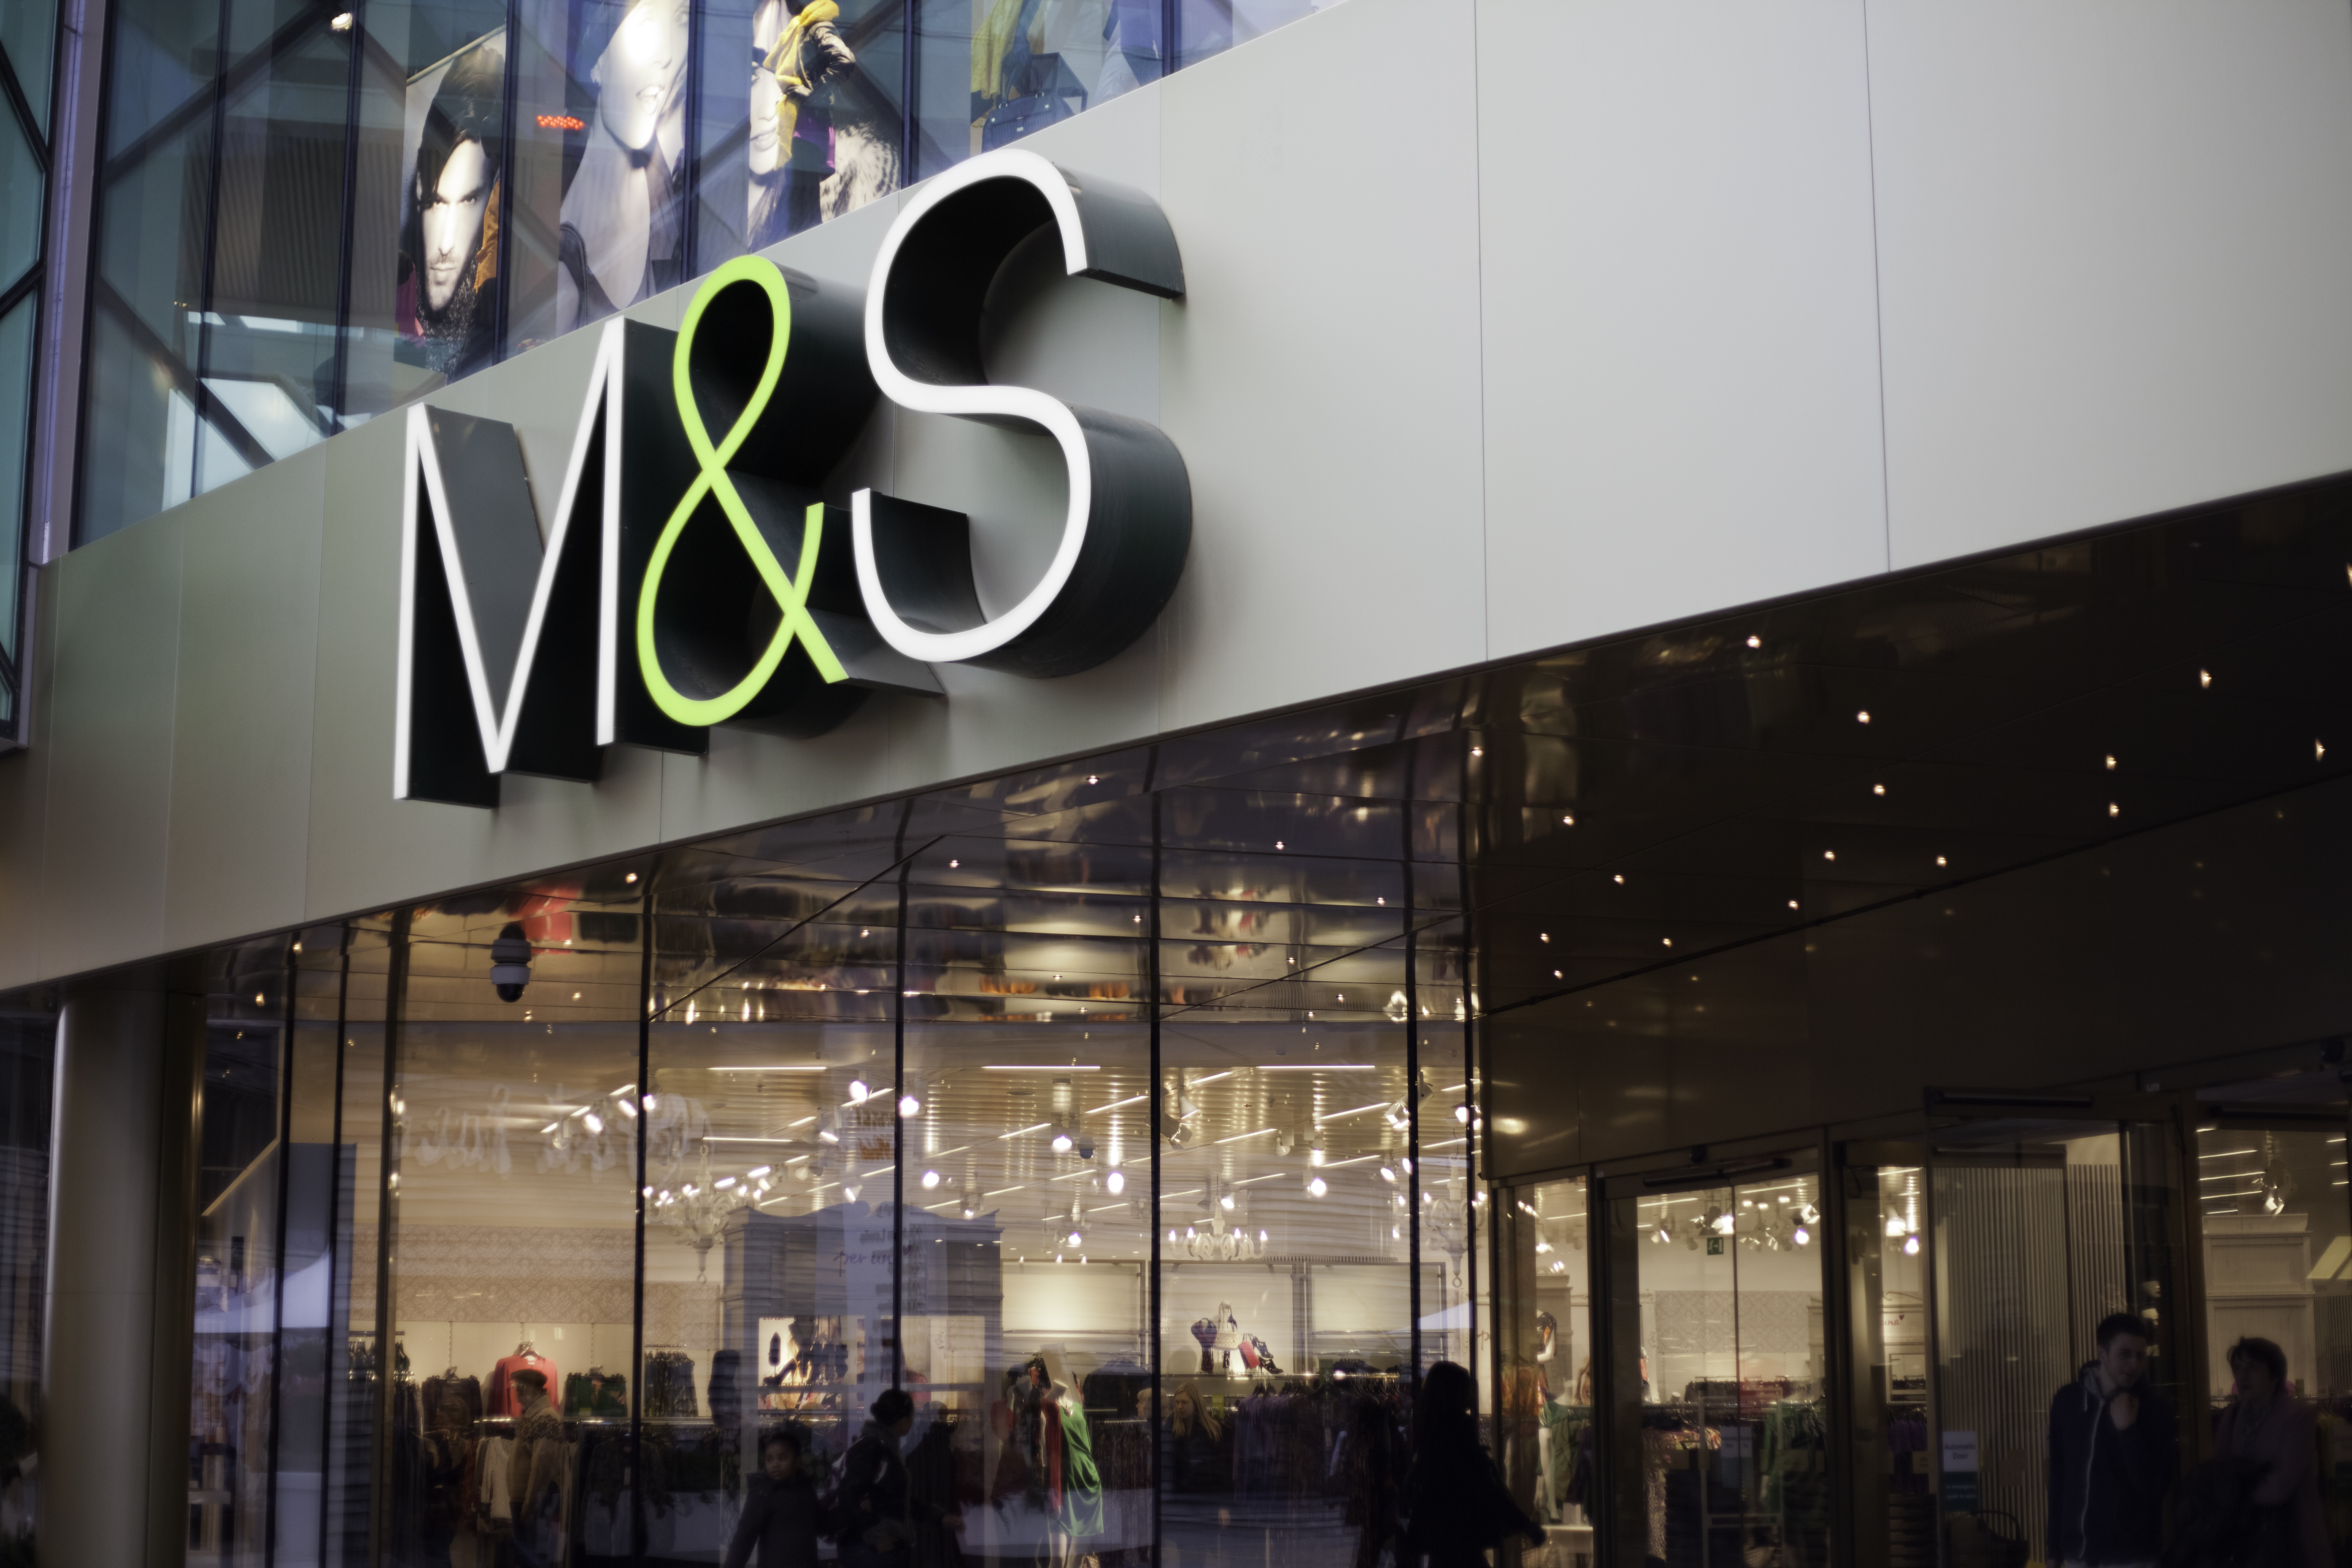 Marks and Spencer has confirmed the locations of the stores set to close in just weeks